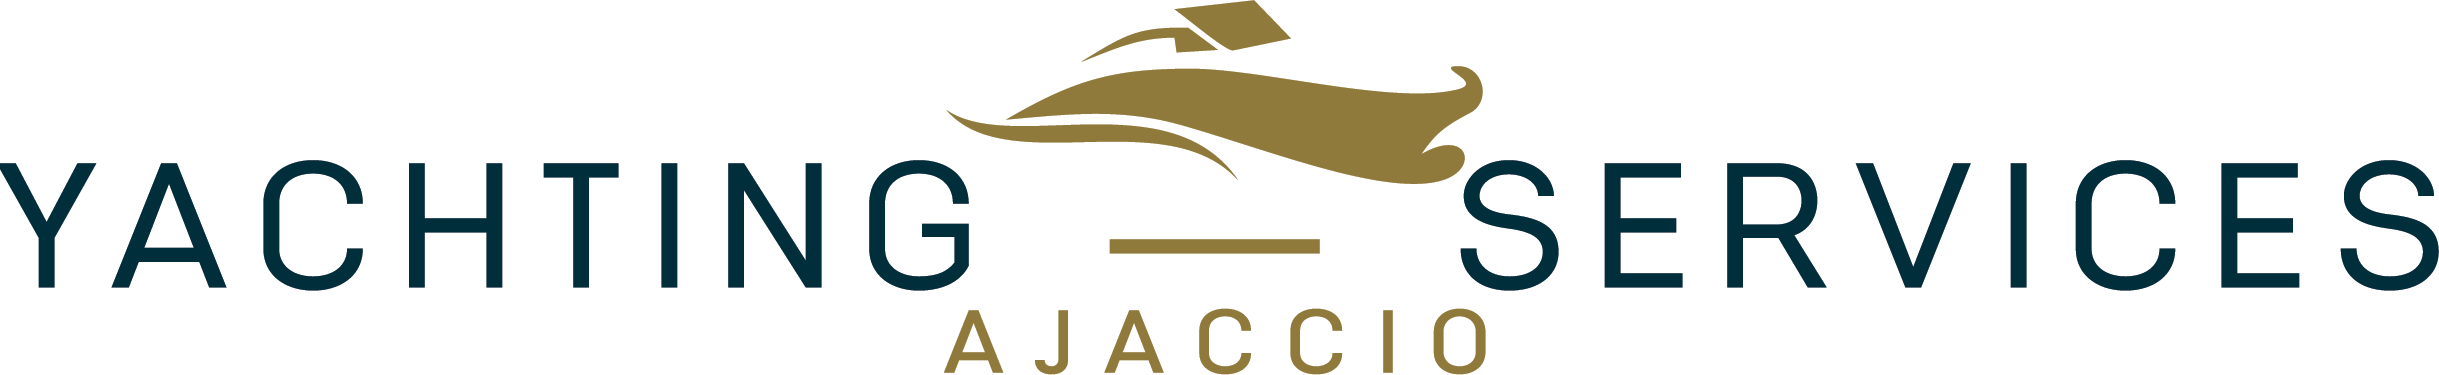 Logo_yachtingservices